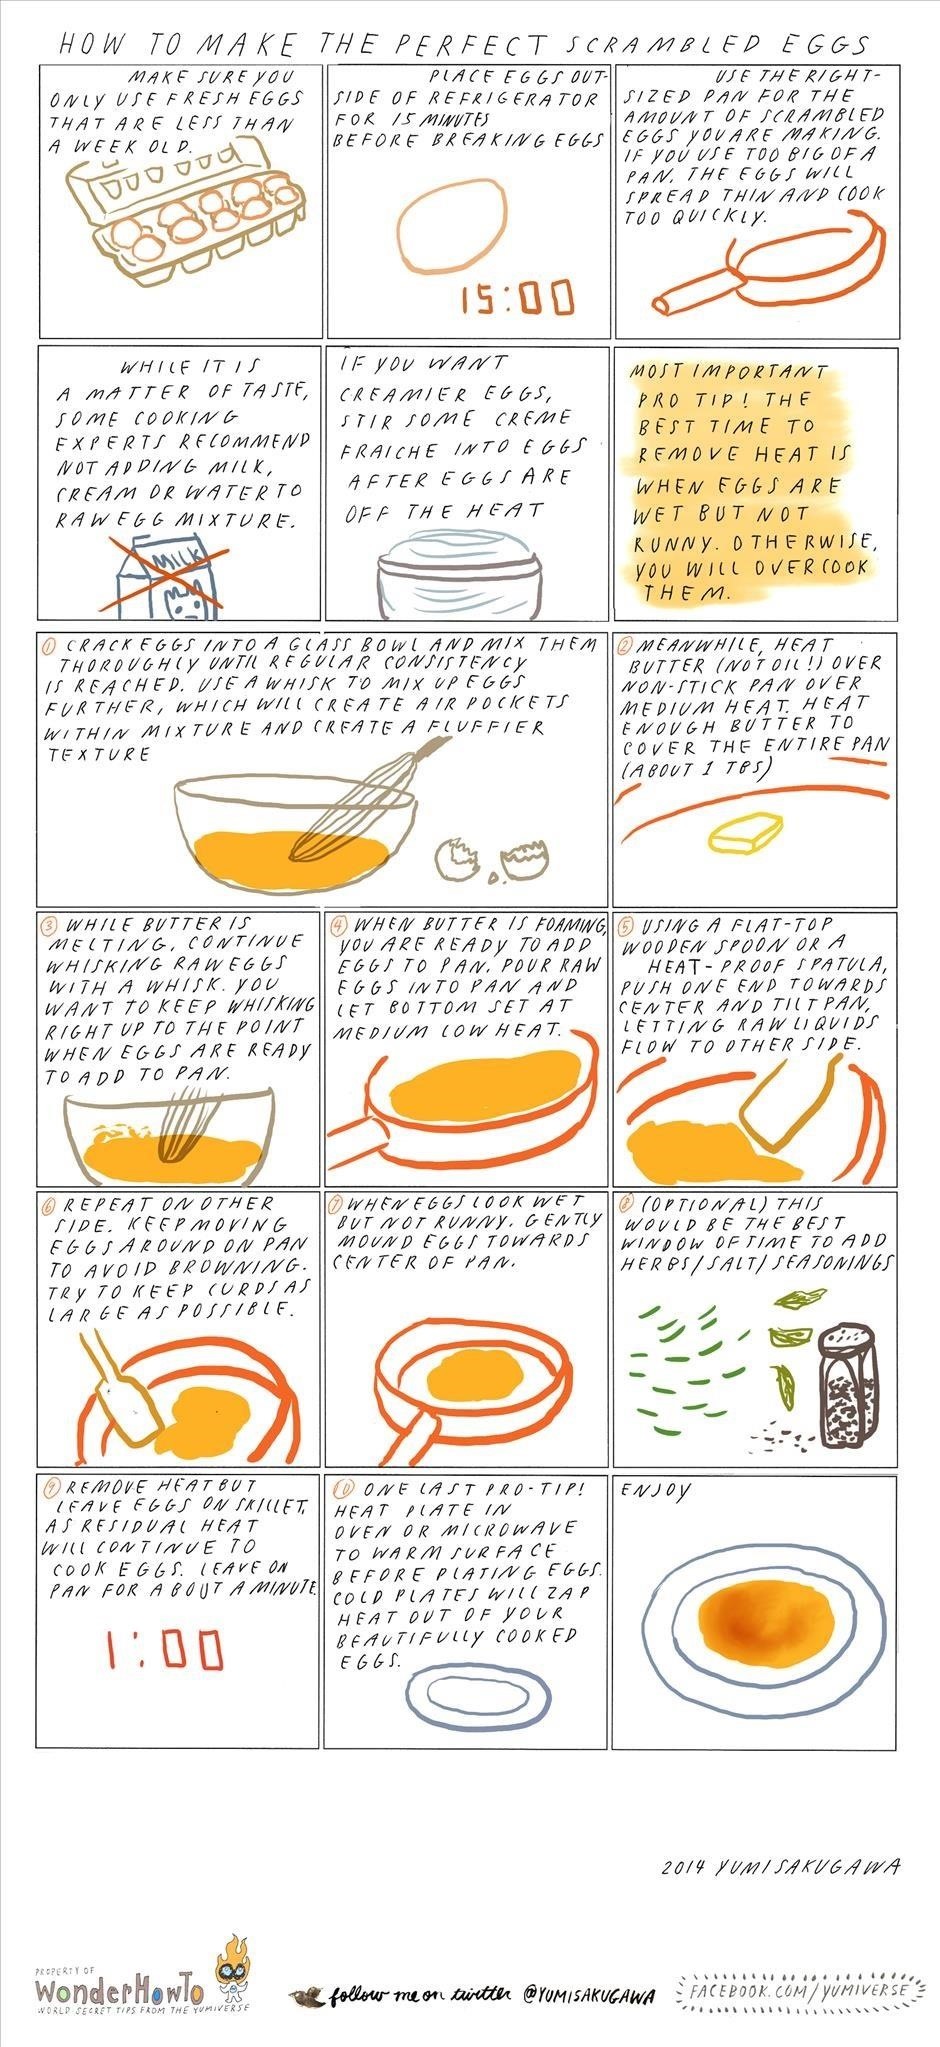 How to Make the Perfect Scrambled Eggs